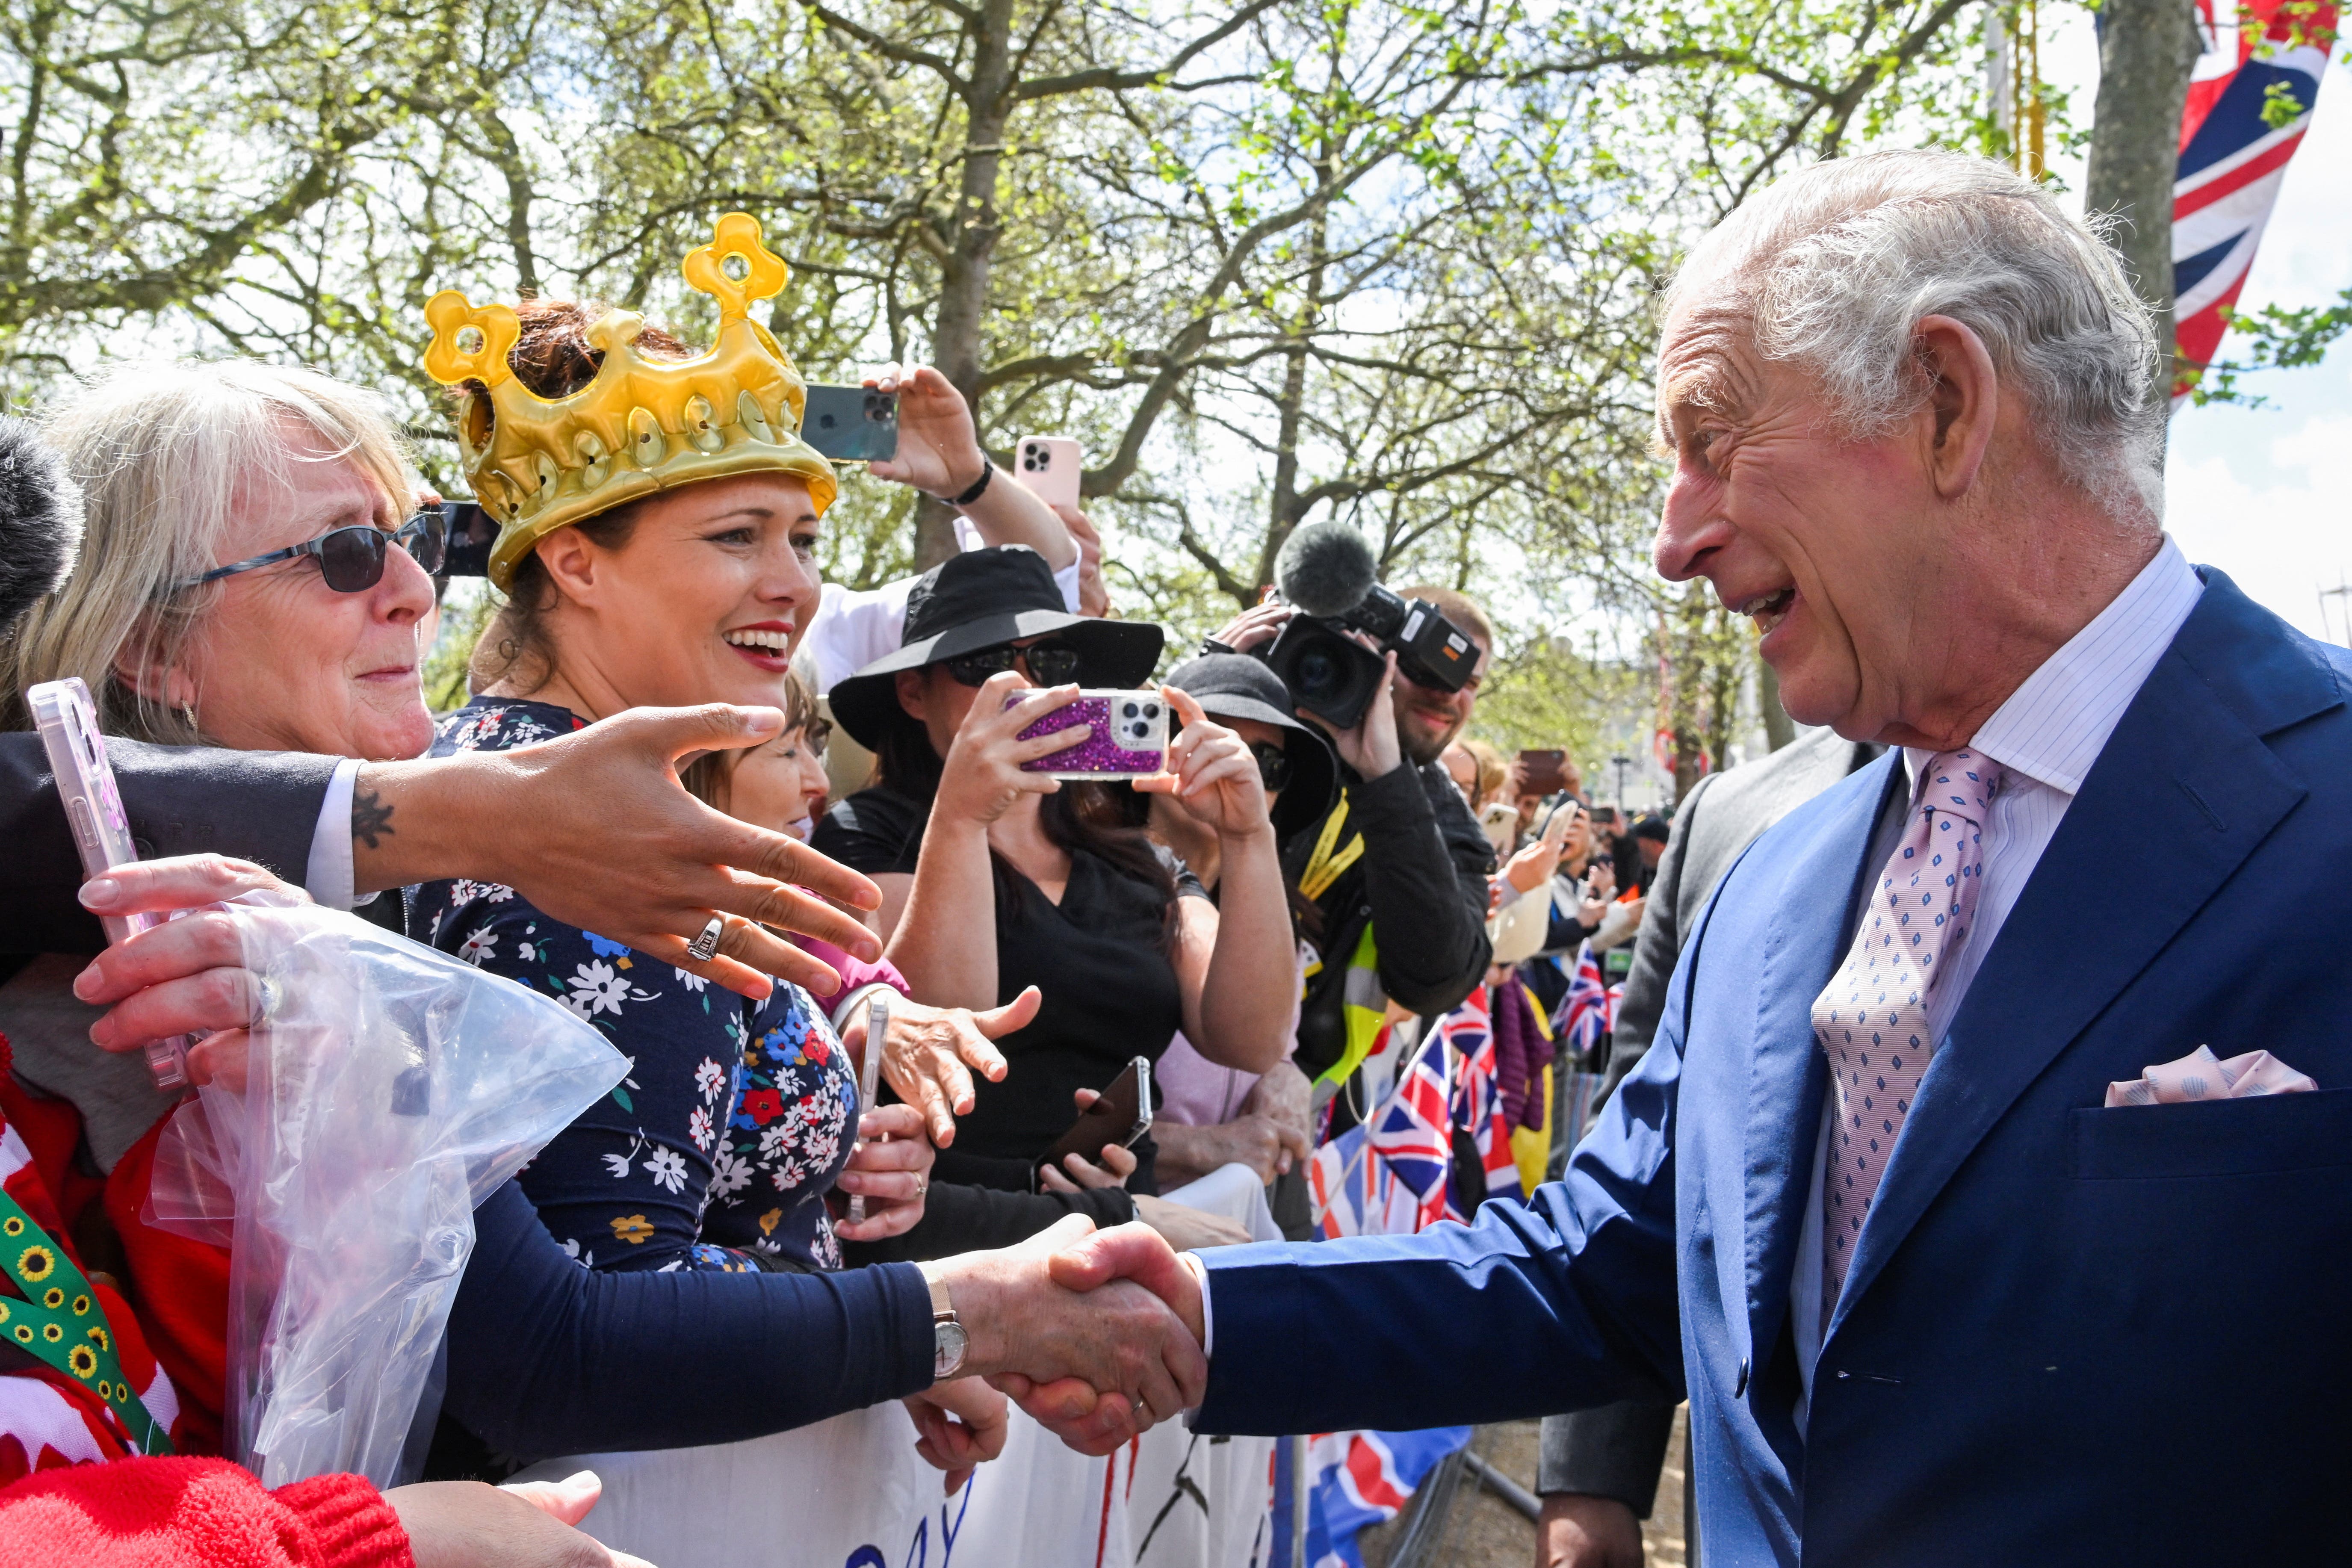 The King on a walkabout outside Buckingham Palace, ahead of the coronation on Saturday (PA)